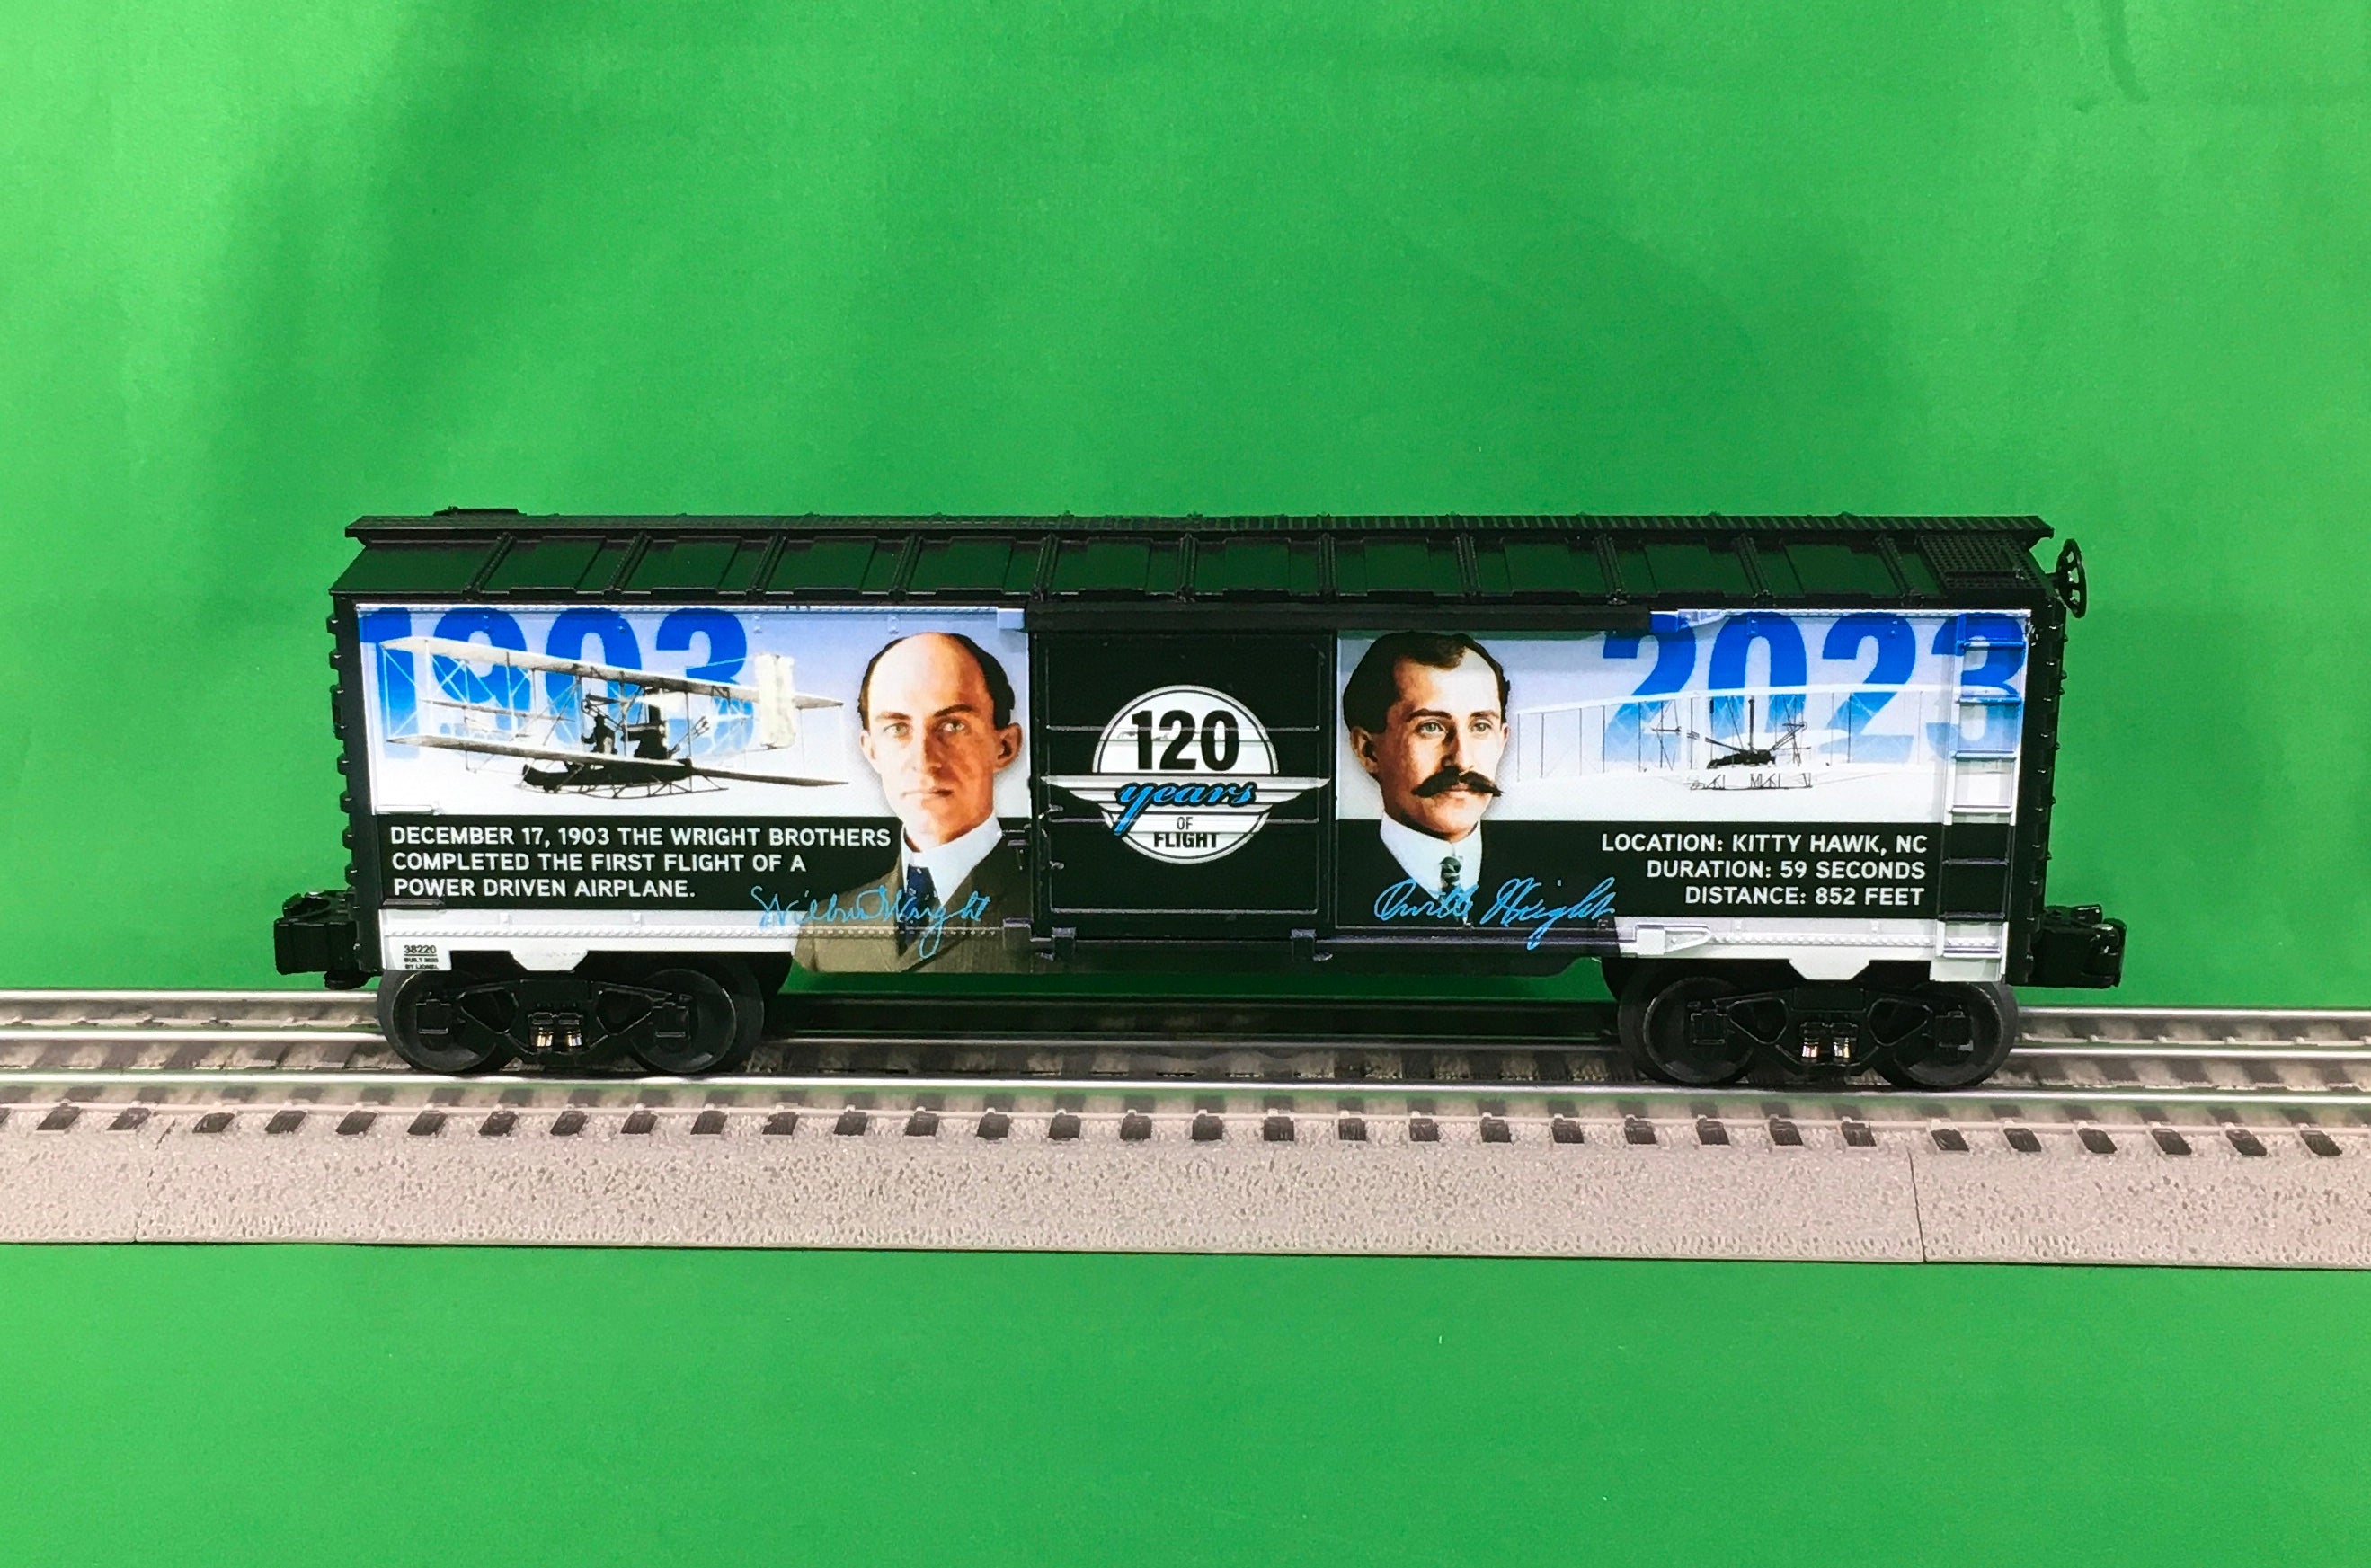 Lionel 2338220 - U.S. American History "Wright Brothers" Boxcar (120th Anniversary)